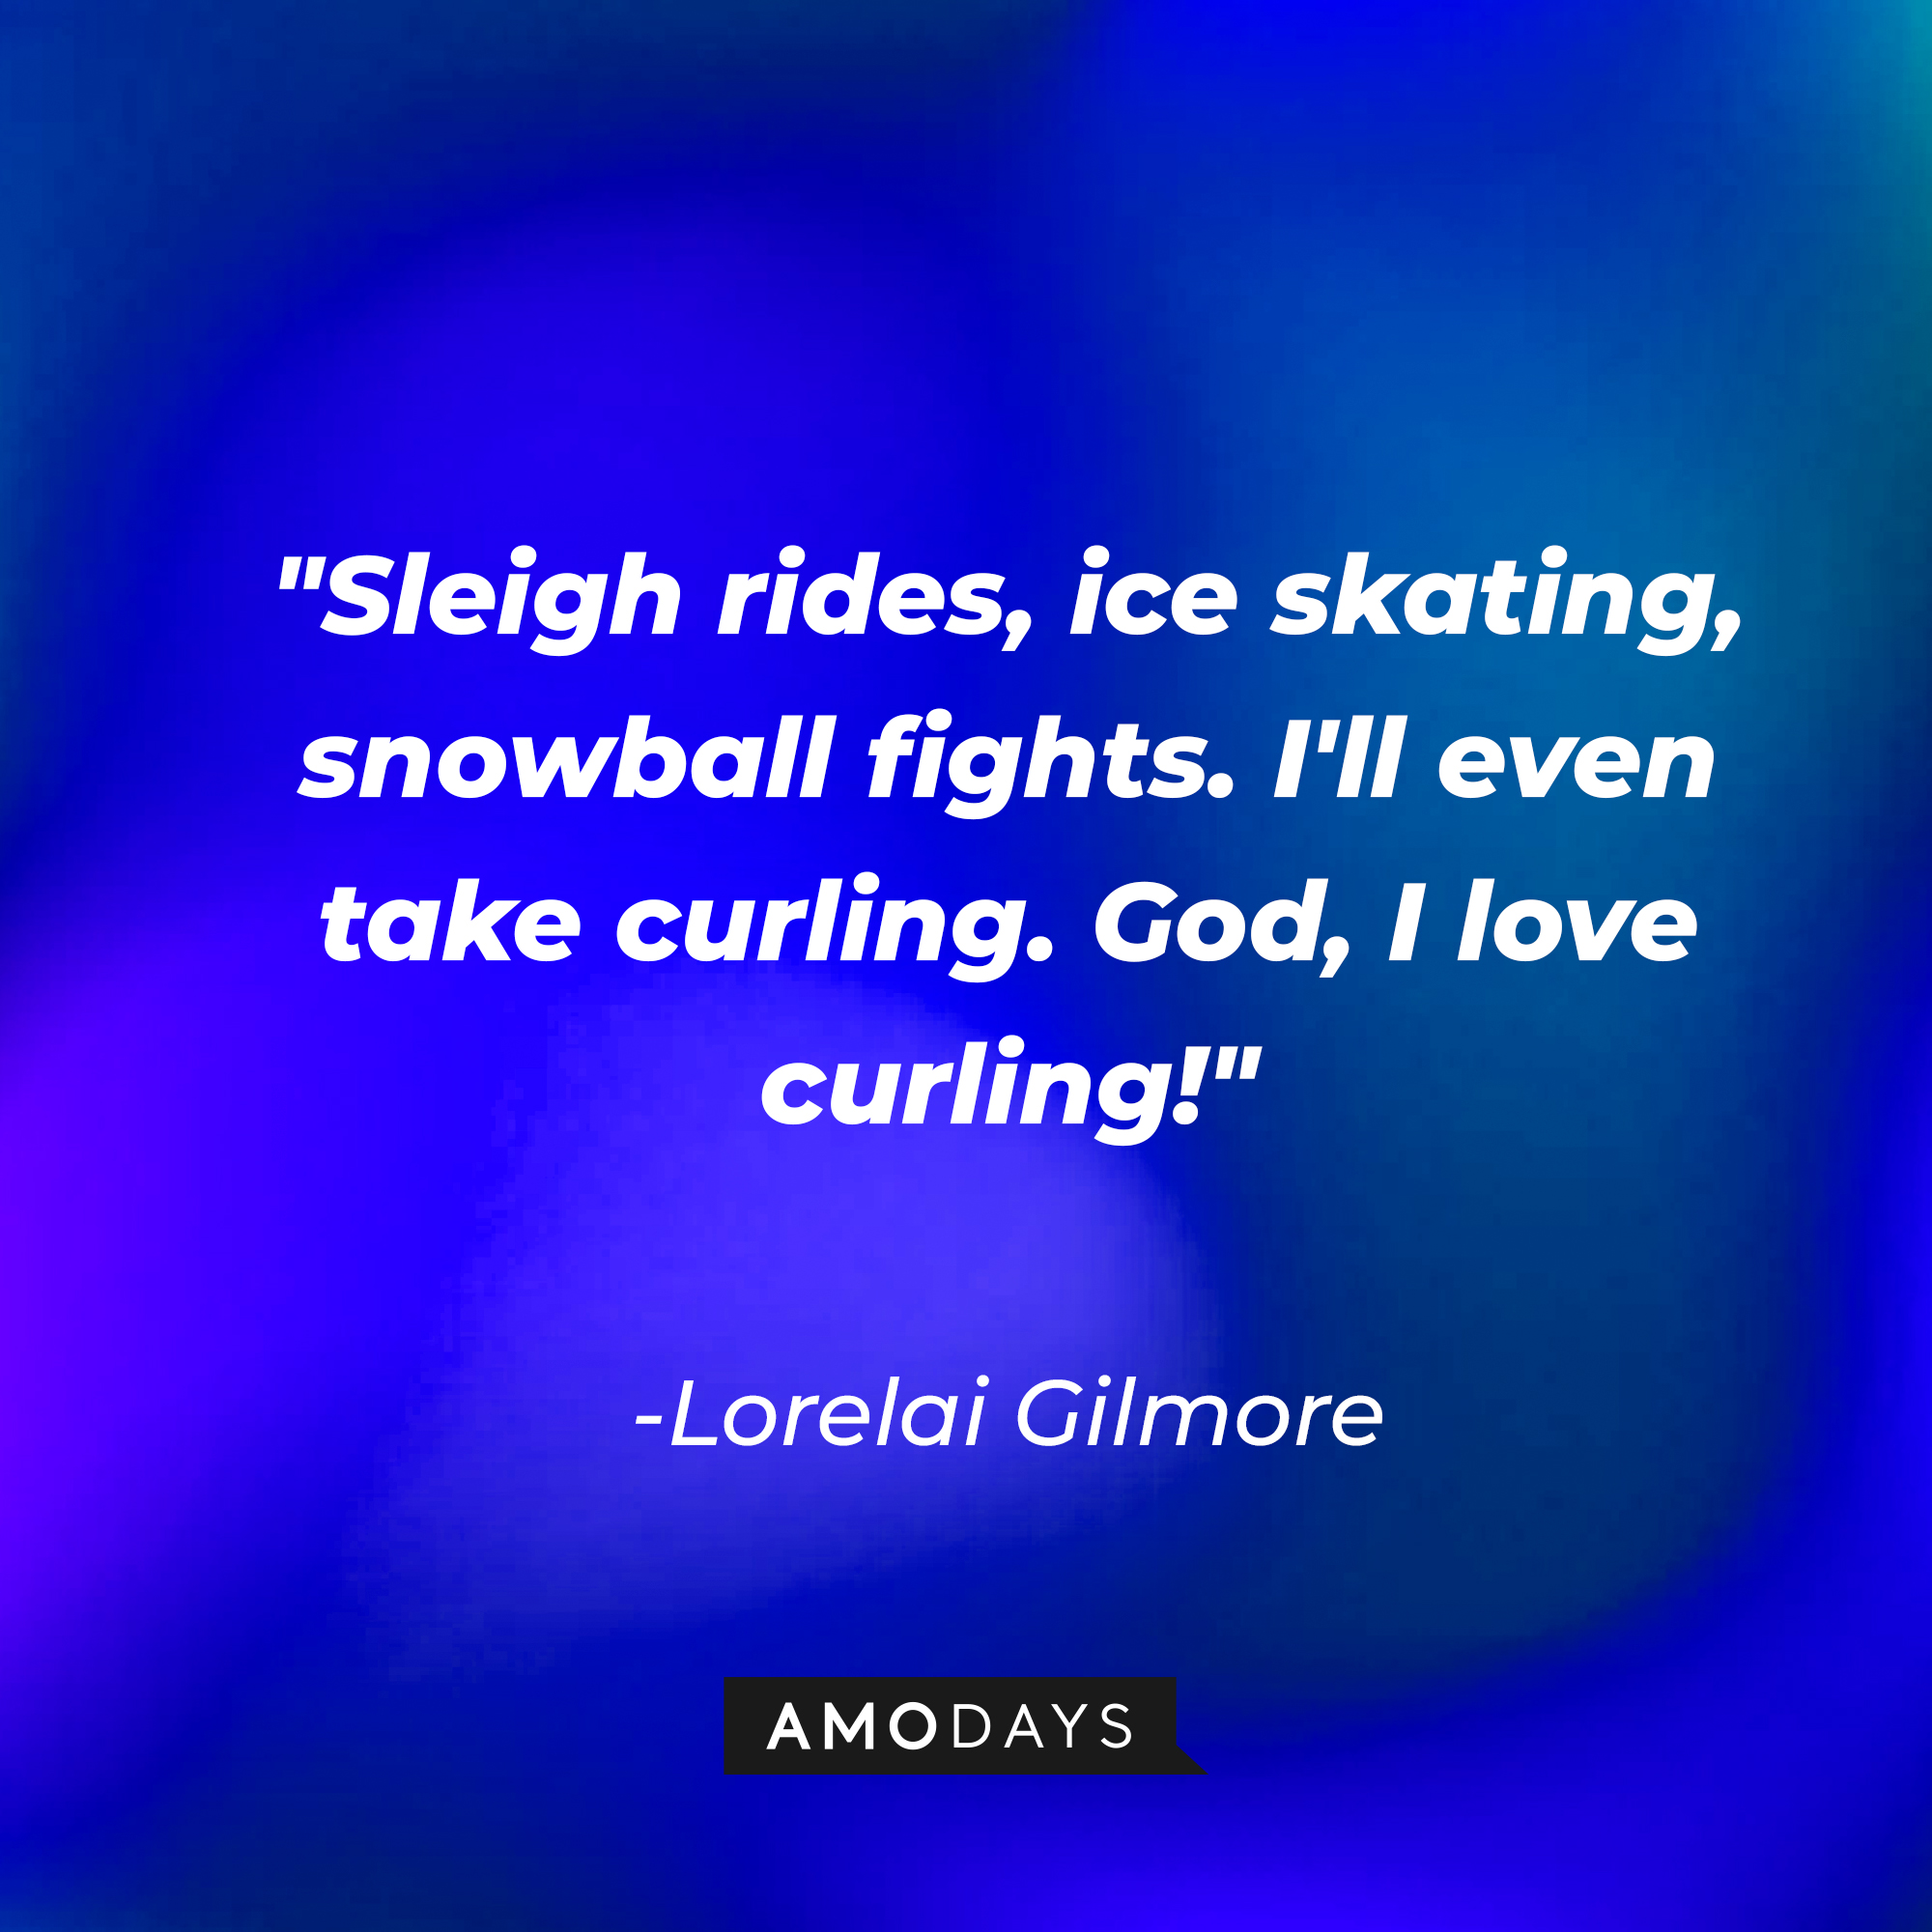 Lorelai Gilmore's quote: "Sleigh rides, ice skating, snowball fights. I'll even take curling. God, I love curling!" | Source: AmoDays